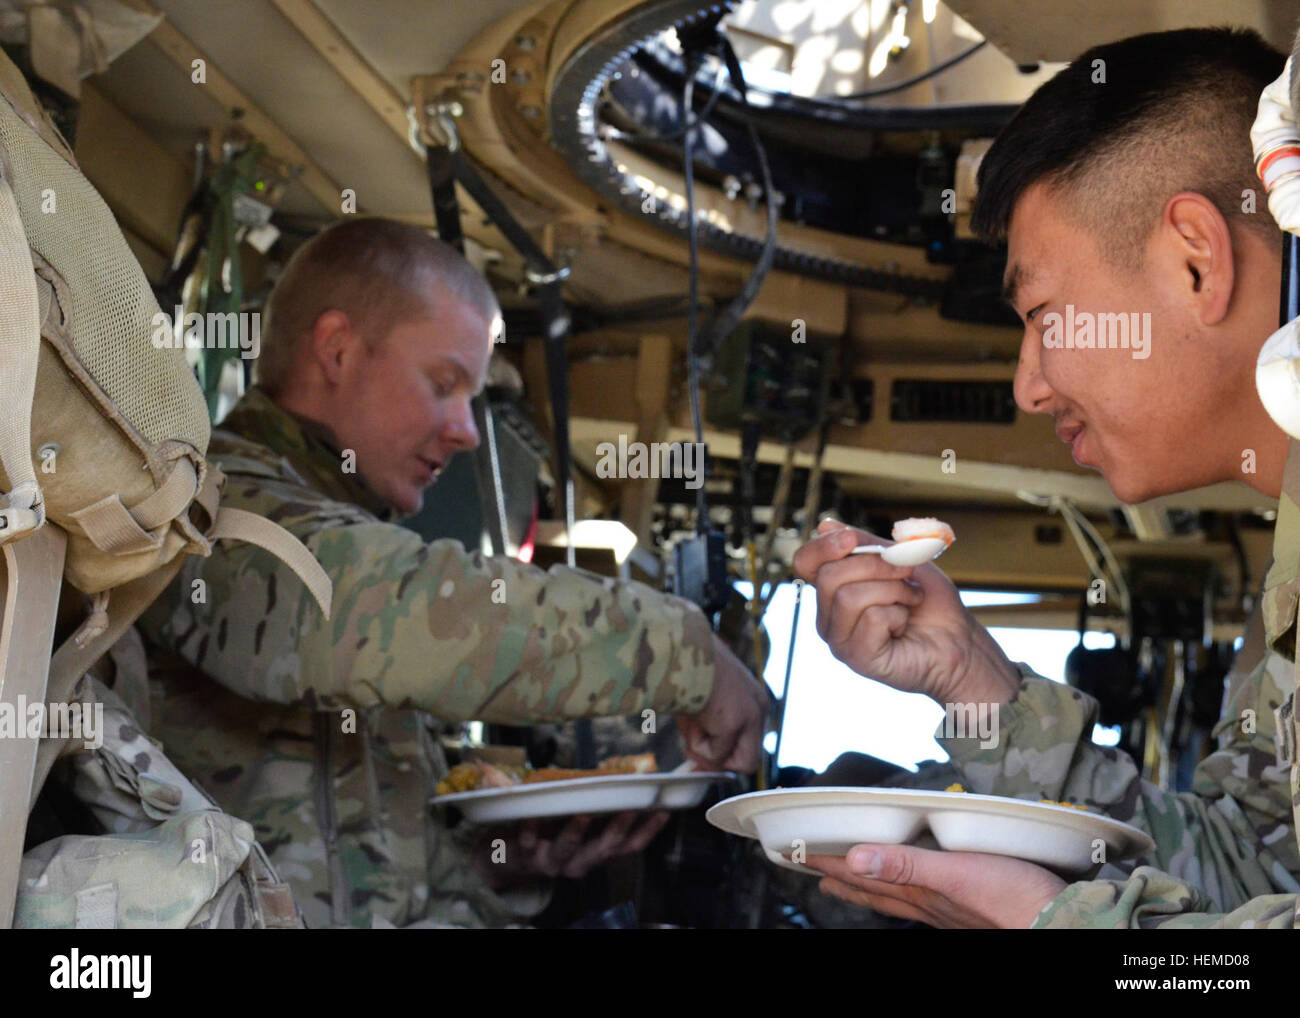 Army Spc. Peter Chang (right), and U.S. Army Spc. Zach Whiteman (left), members of the personal security detail from Headquarters and Headquarters Battery, 3rd Battalion, 320th Field Artillery Regiment, 101st Airborne Division (Air Assault), eat Christmas lunch inside a MaxxPro Mine Resistant Ambush Protected vehicle at Combat Outpost Justice, Afghanistan, Dec. 25, 2012. The detail was posted outside the dining facility while U.S. Army Brig. Gen. Clarence Chinn, Deputy Commander, Regional Command East, visited with U.S. Army Soldiers and Afghan Uniformed Police during the holiday meal. (U.S. A Stock Photo